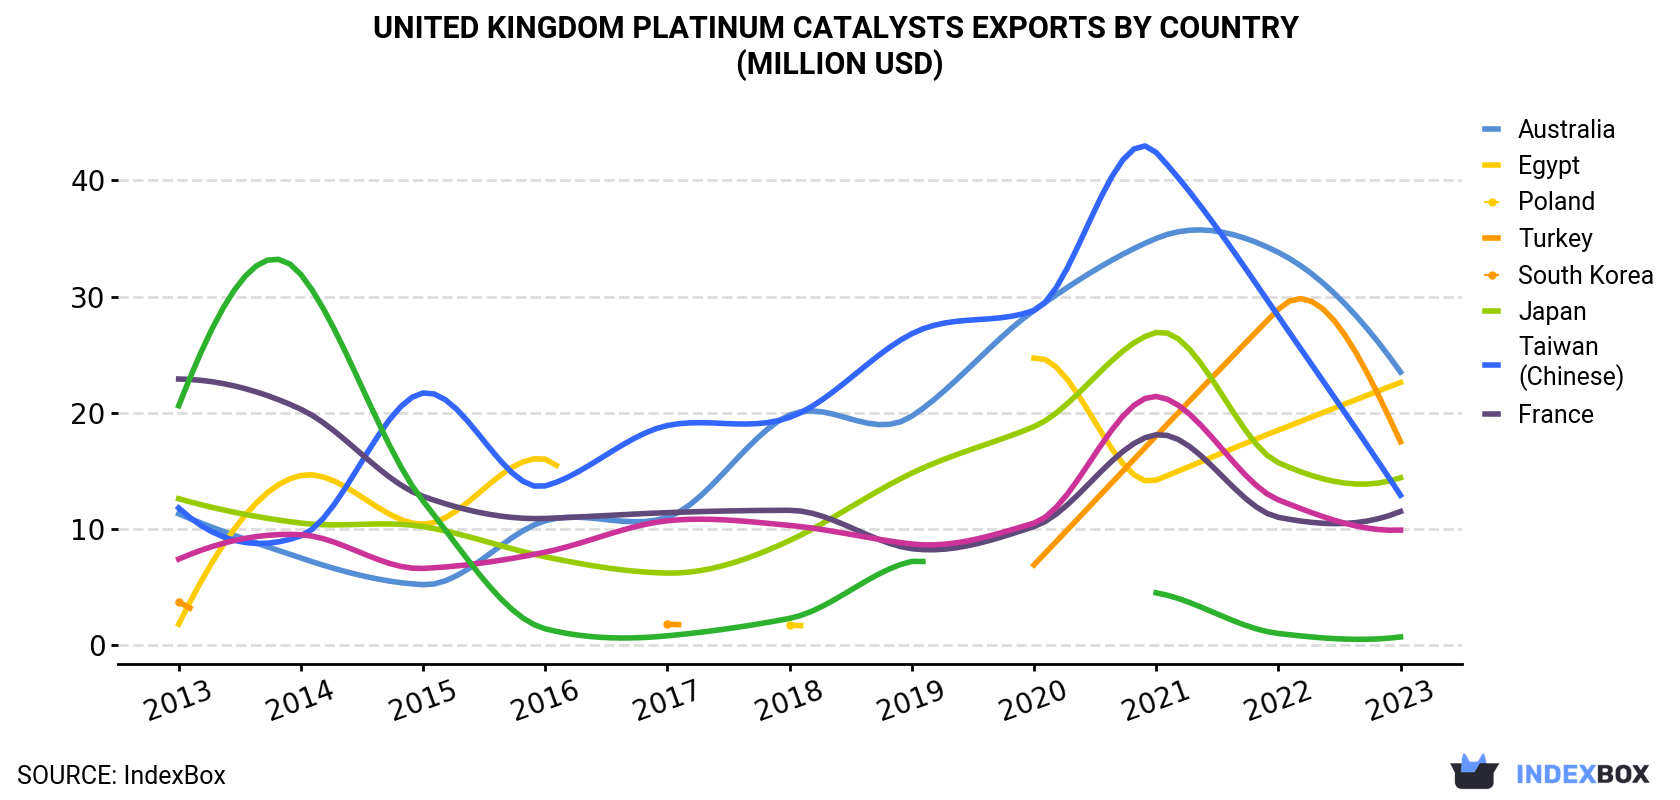 United Kingdom Platinum Catalysts Exports By Country (Million USD)